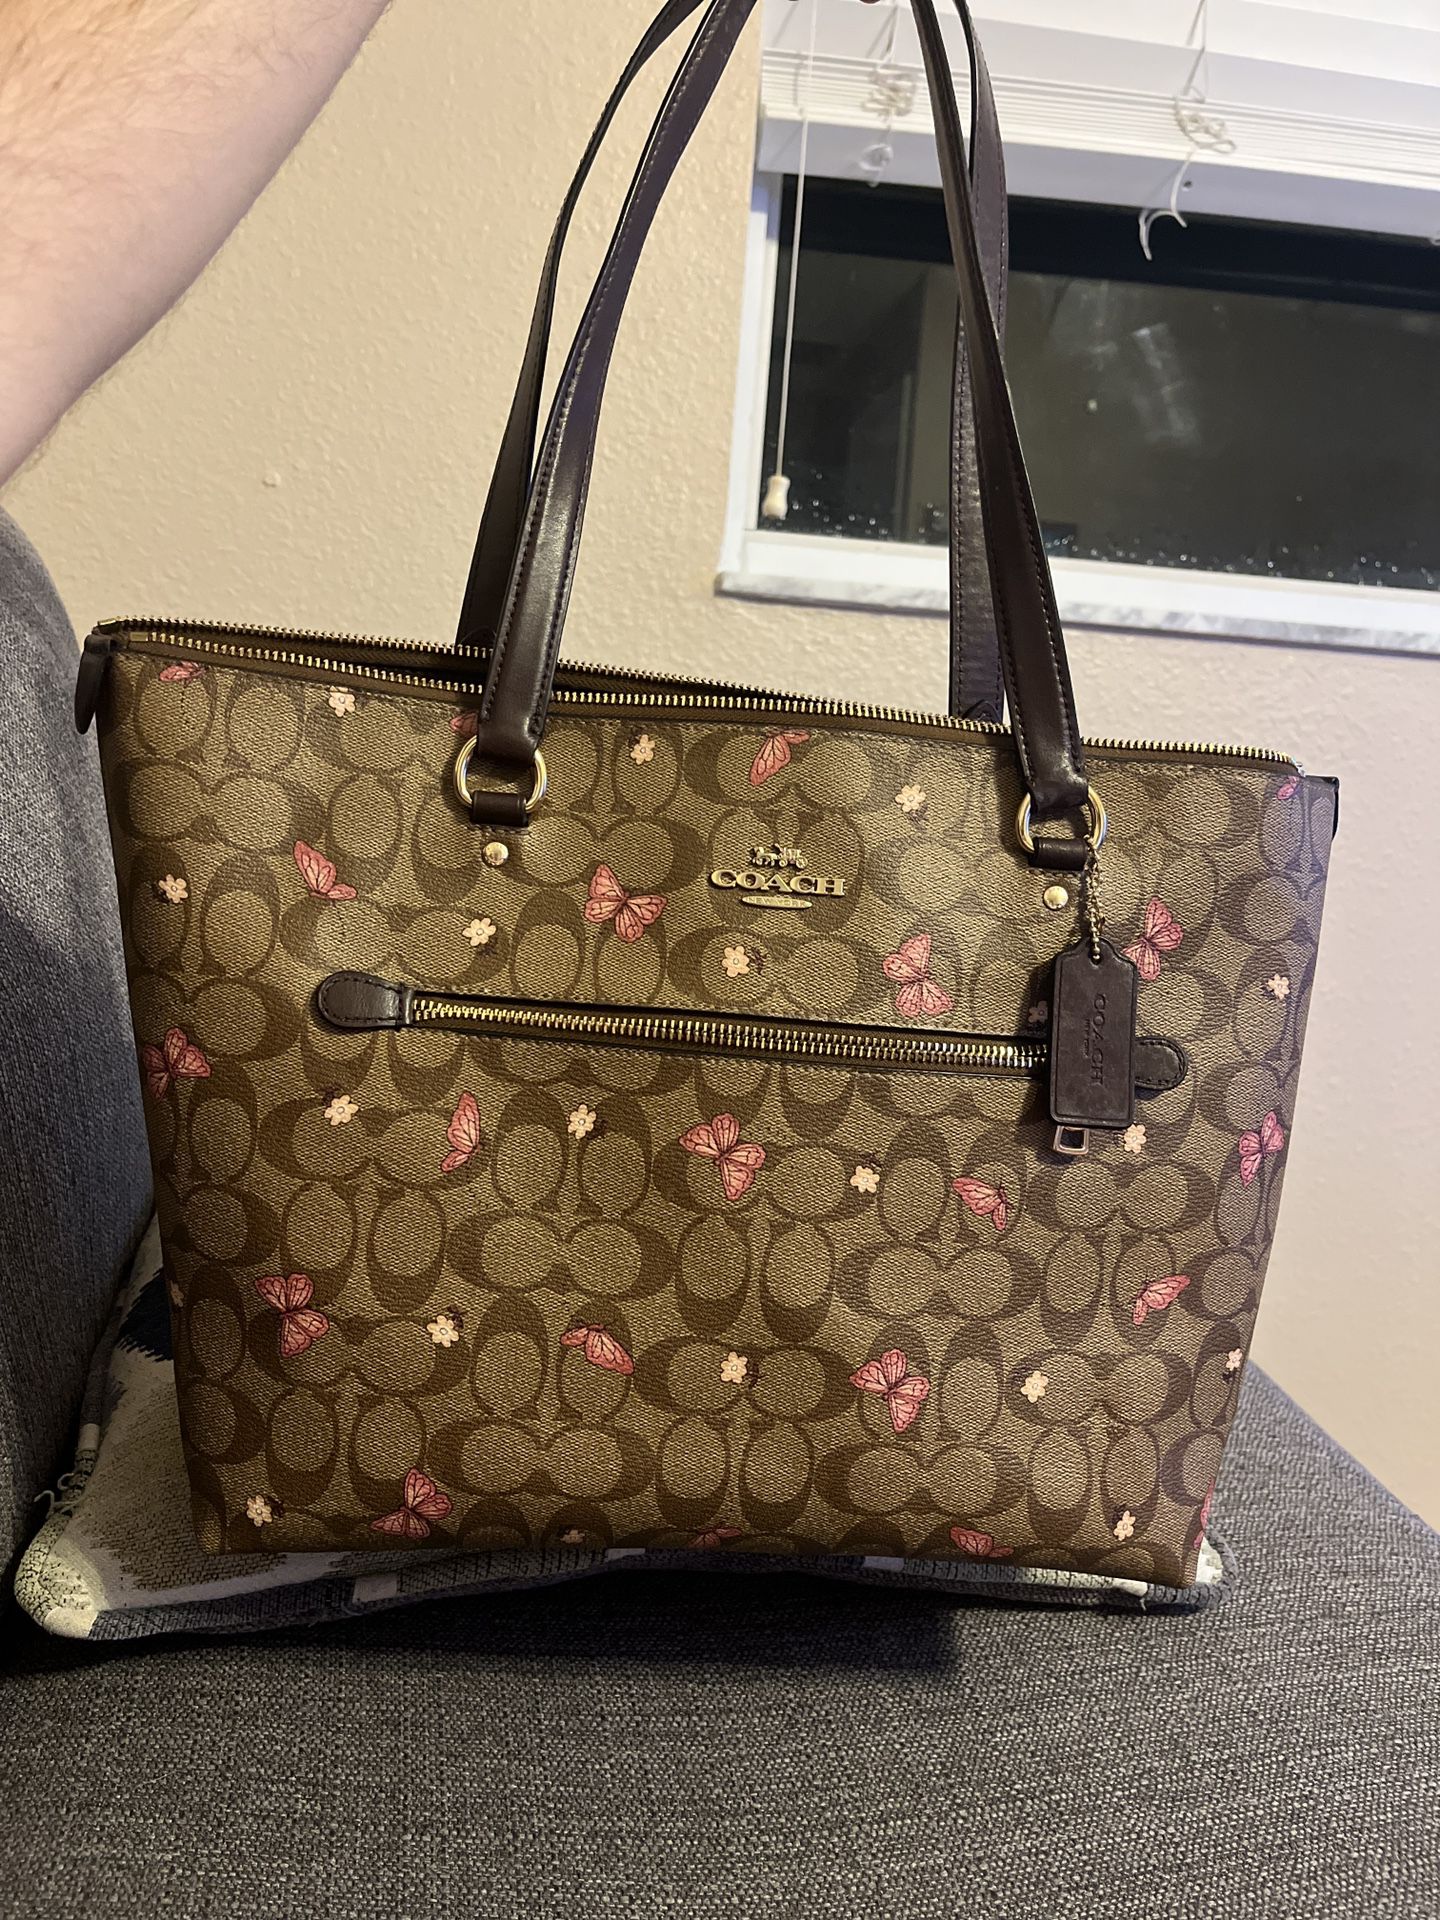 Coach Butterfly Floral Flowers Gallery Tote Purse for Sale in Orlando, FL -  OfferUp